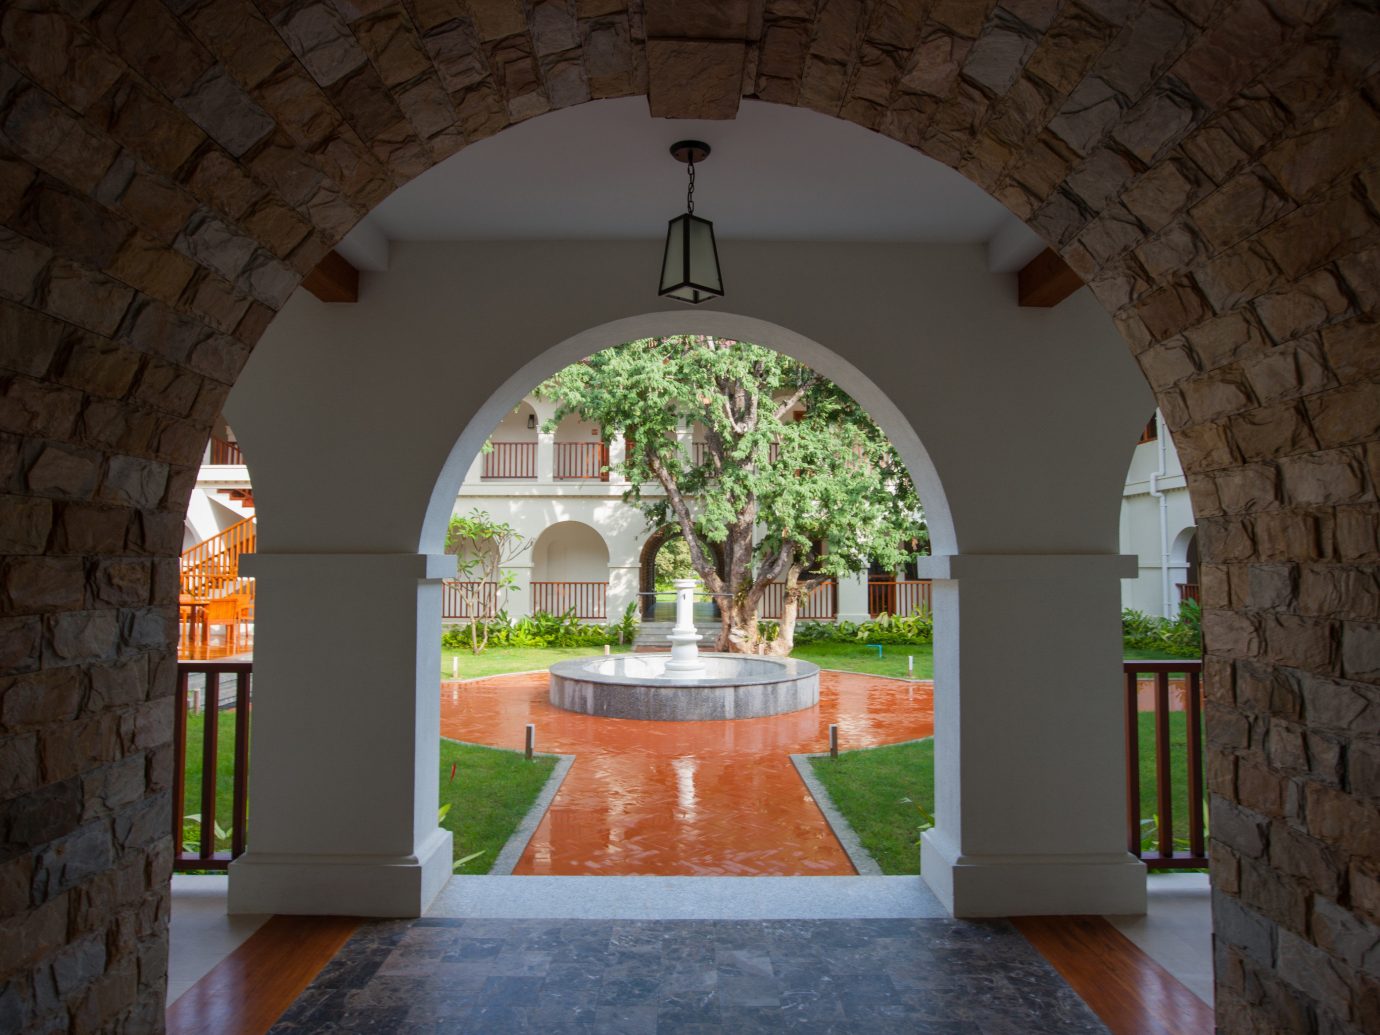 Hotels wall building arch estate house Architecture hacienda home stone chapel Courtyard interior design cottage mansion monastery Villa place of worship